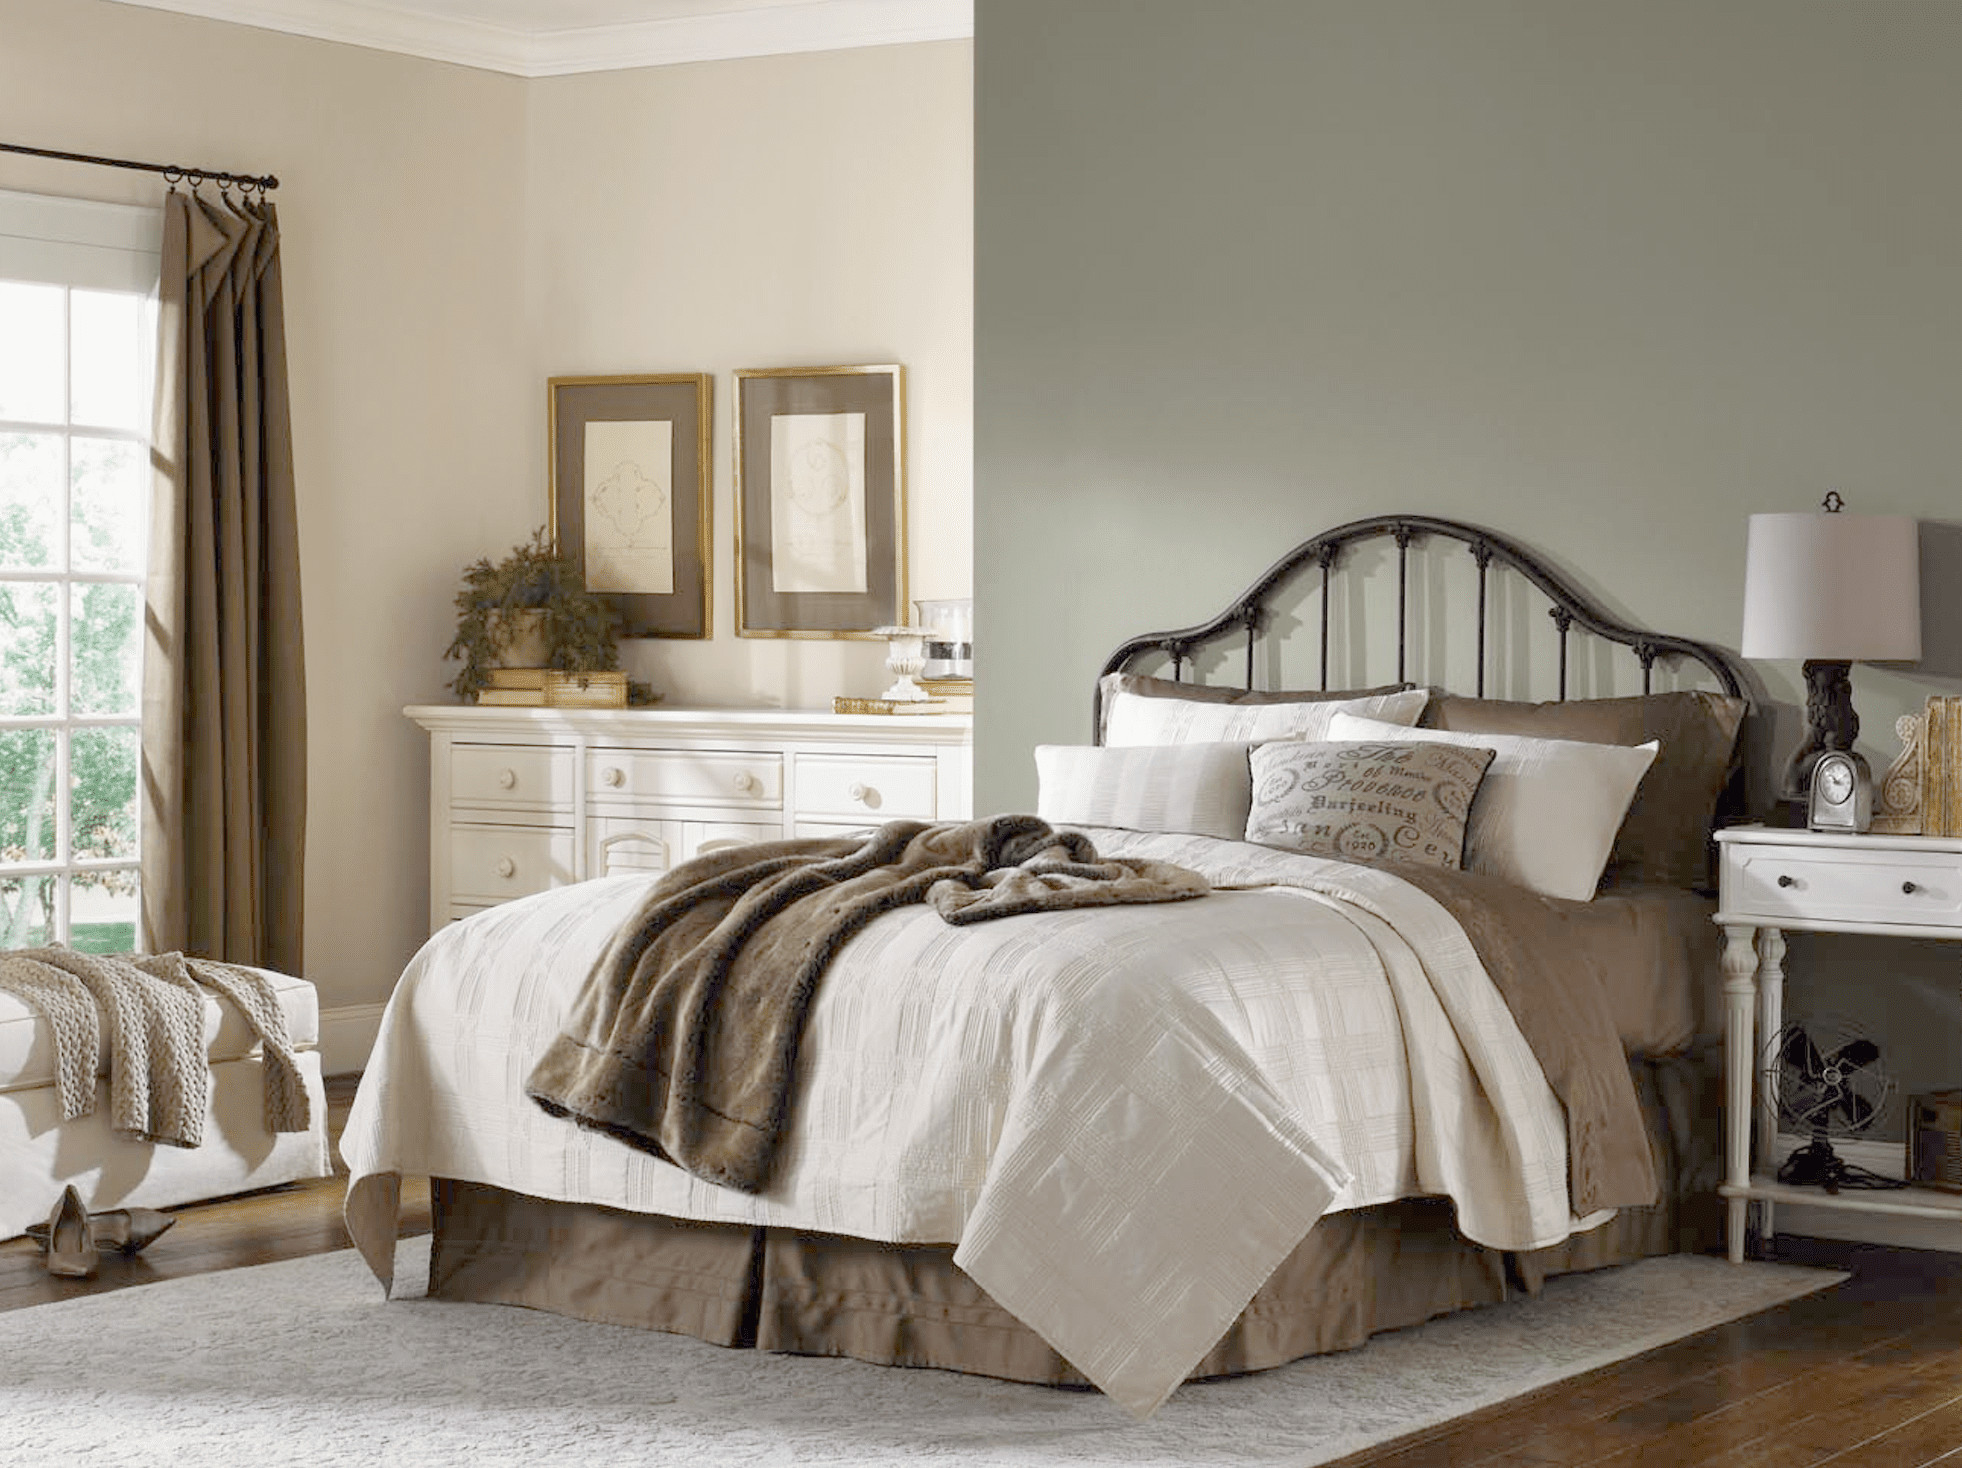 Sherwin Williams Bedroom Paint Colors
 8 Relaxing Sherwin Williams Paint Colors for Bedrooms